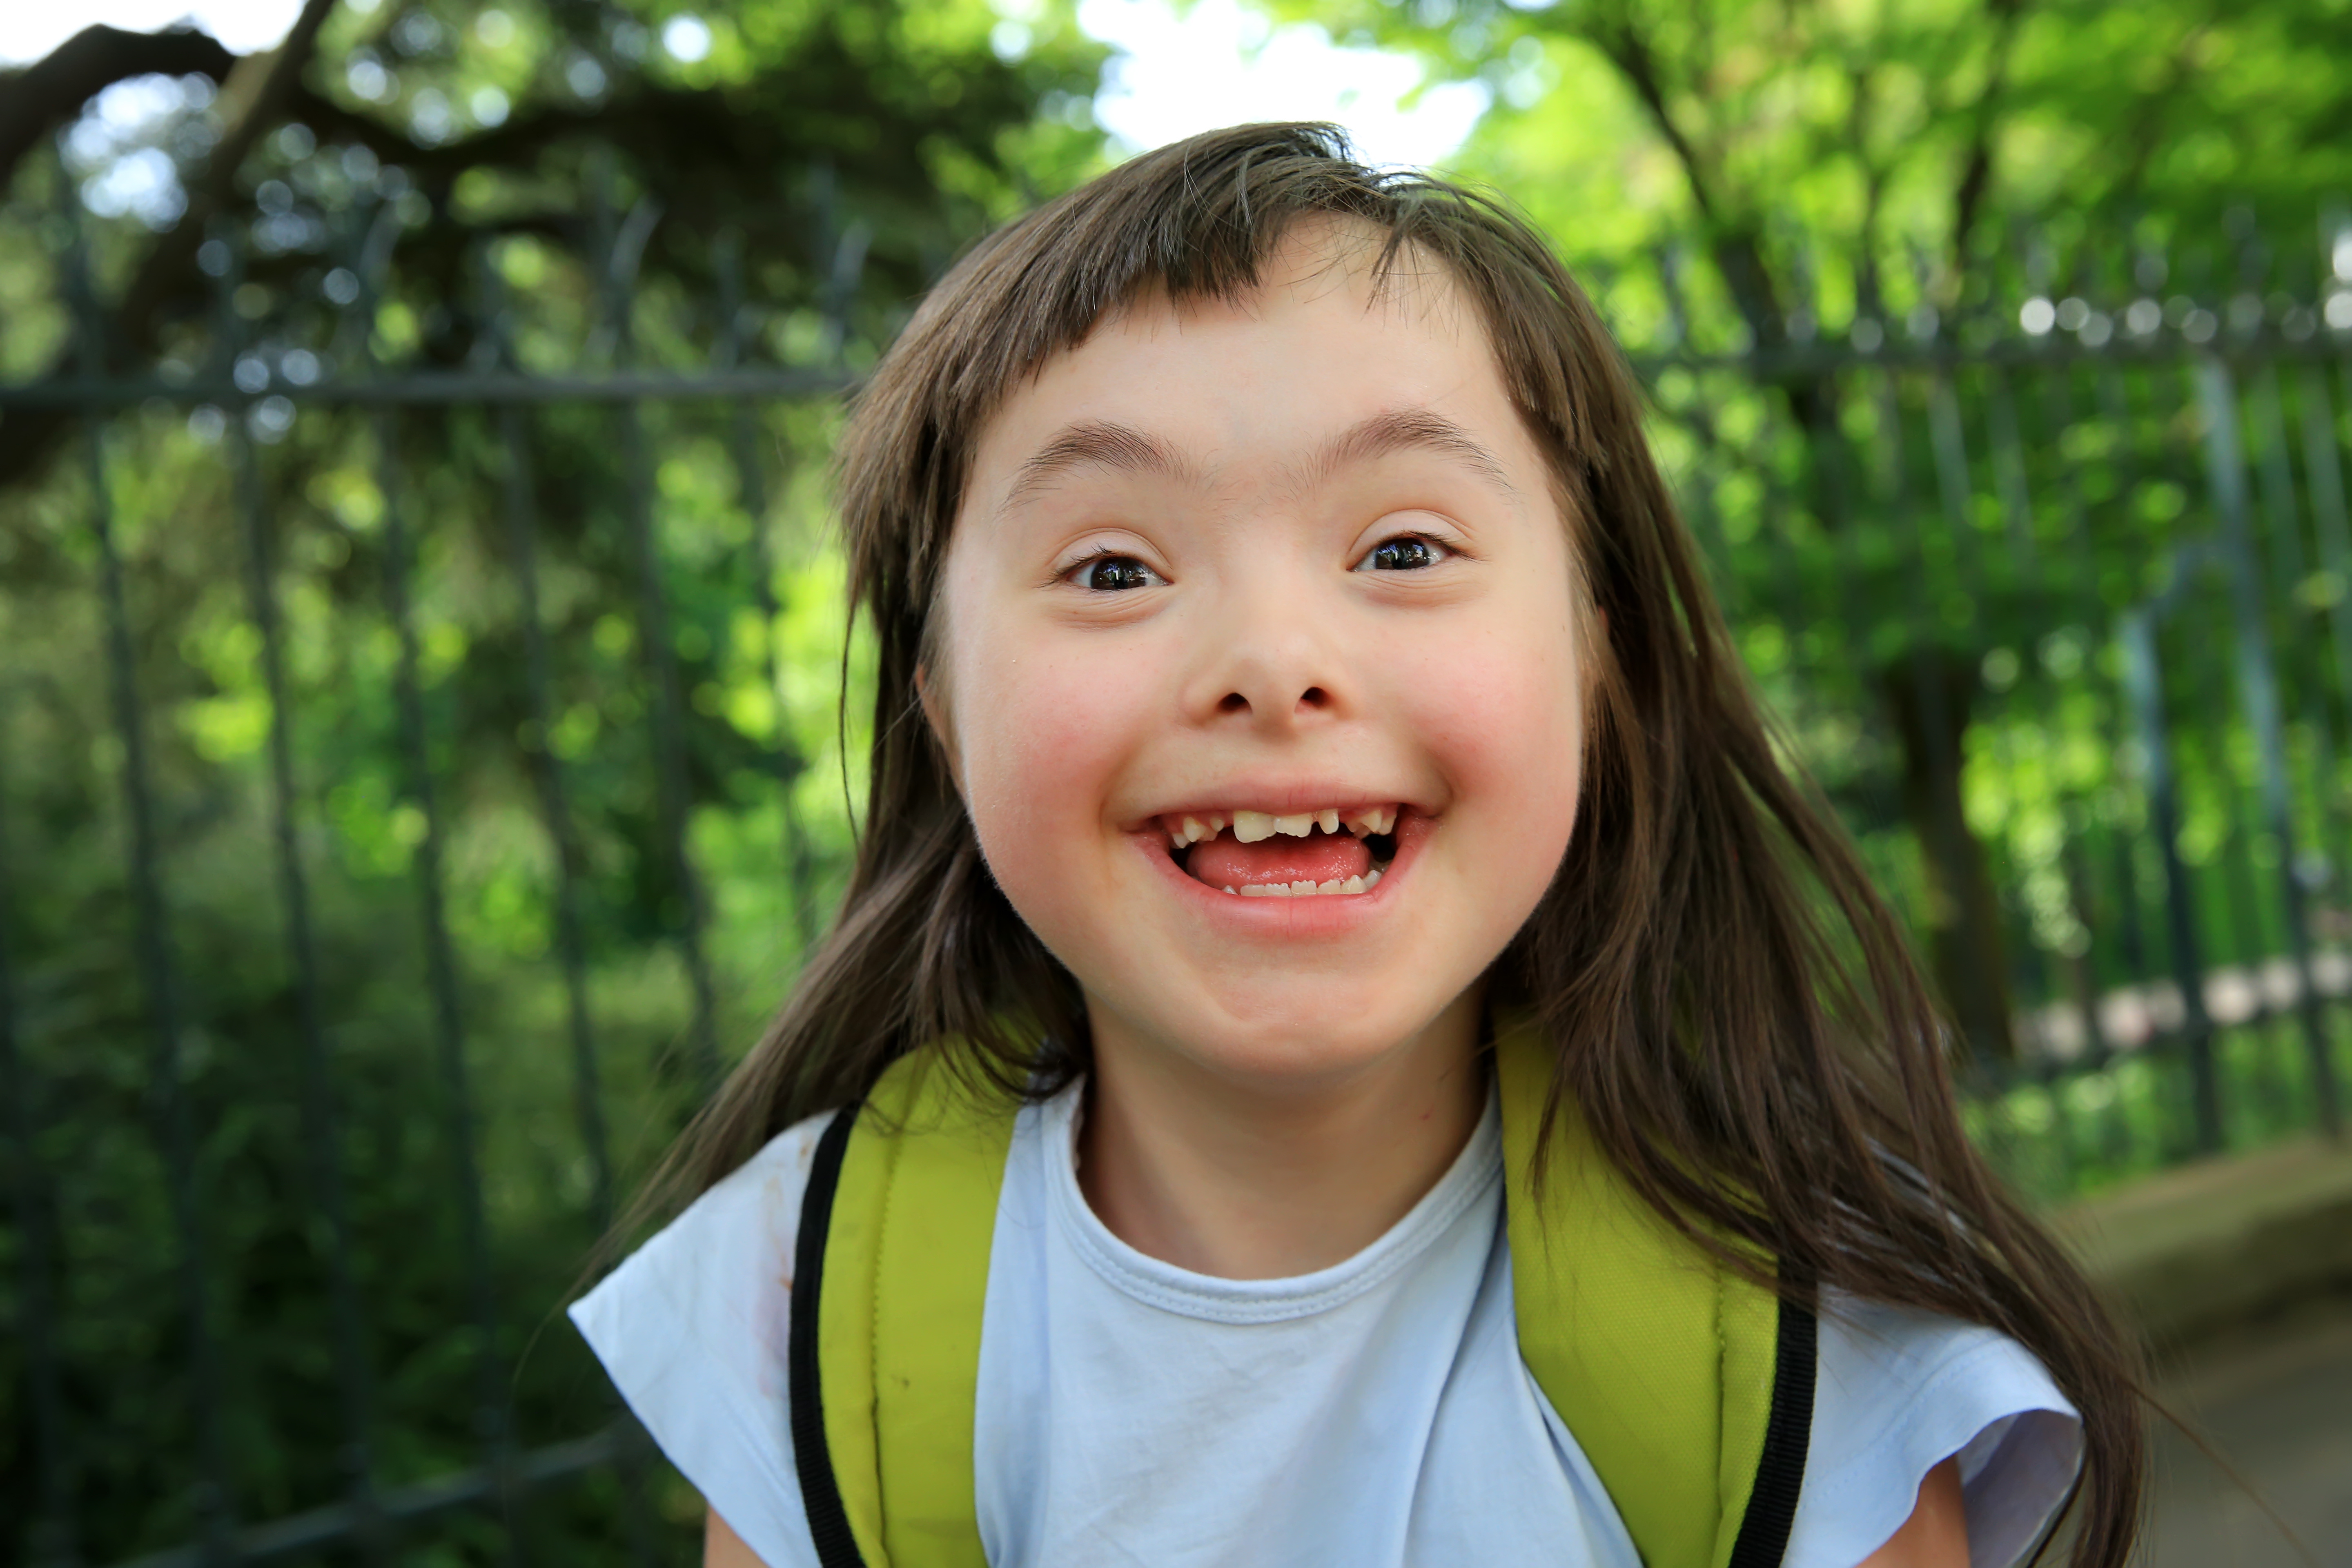 A young person smiles at the camera in the park